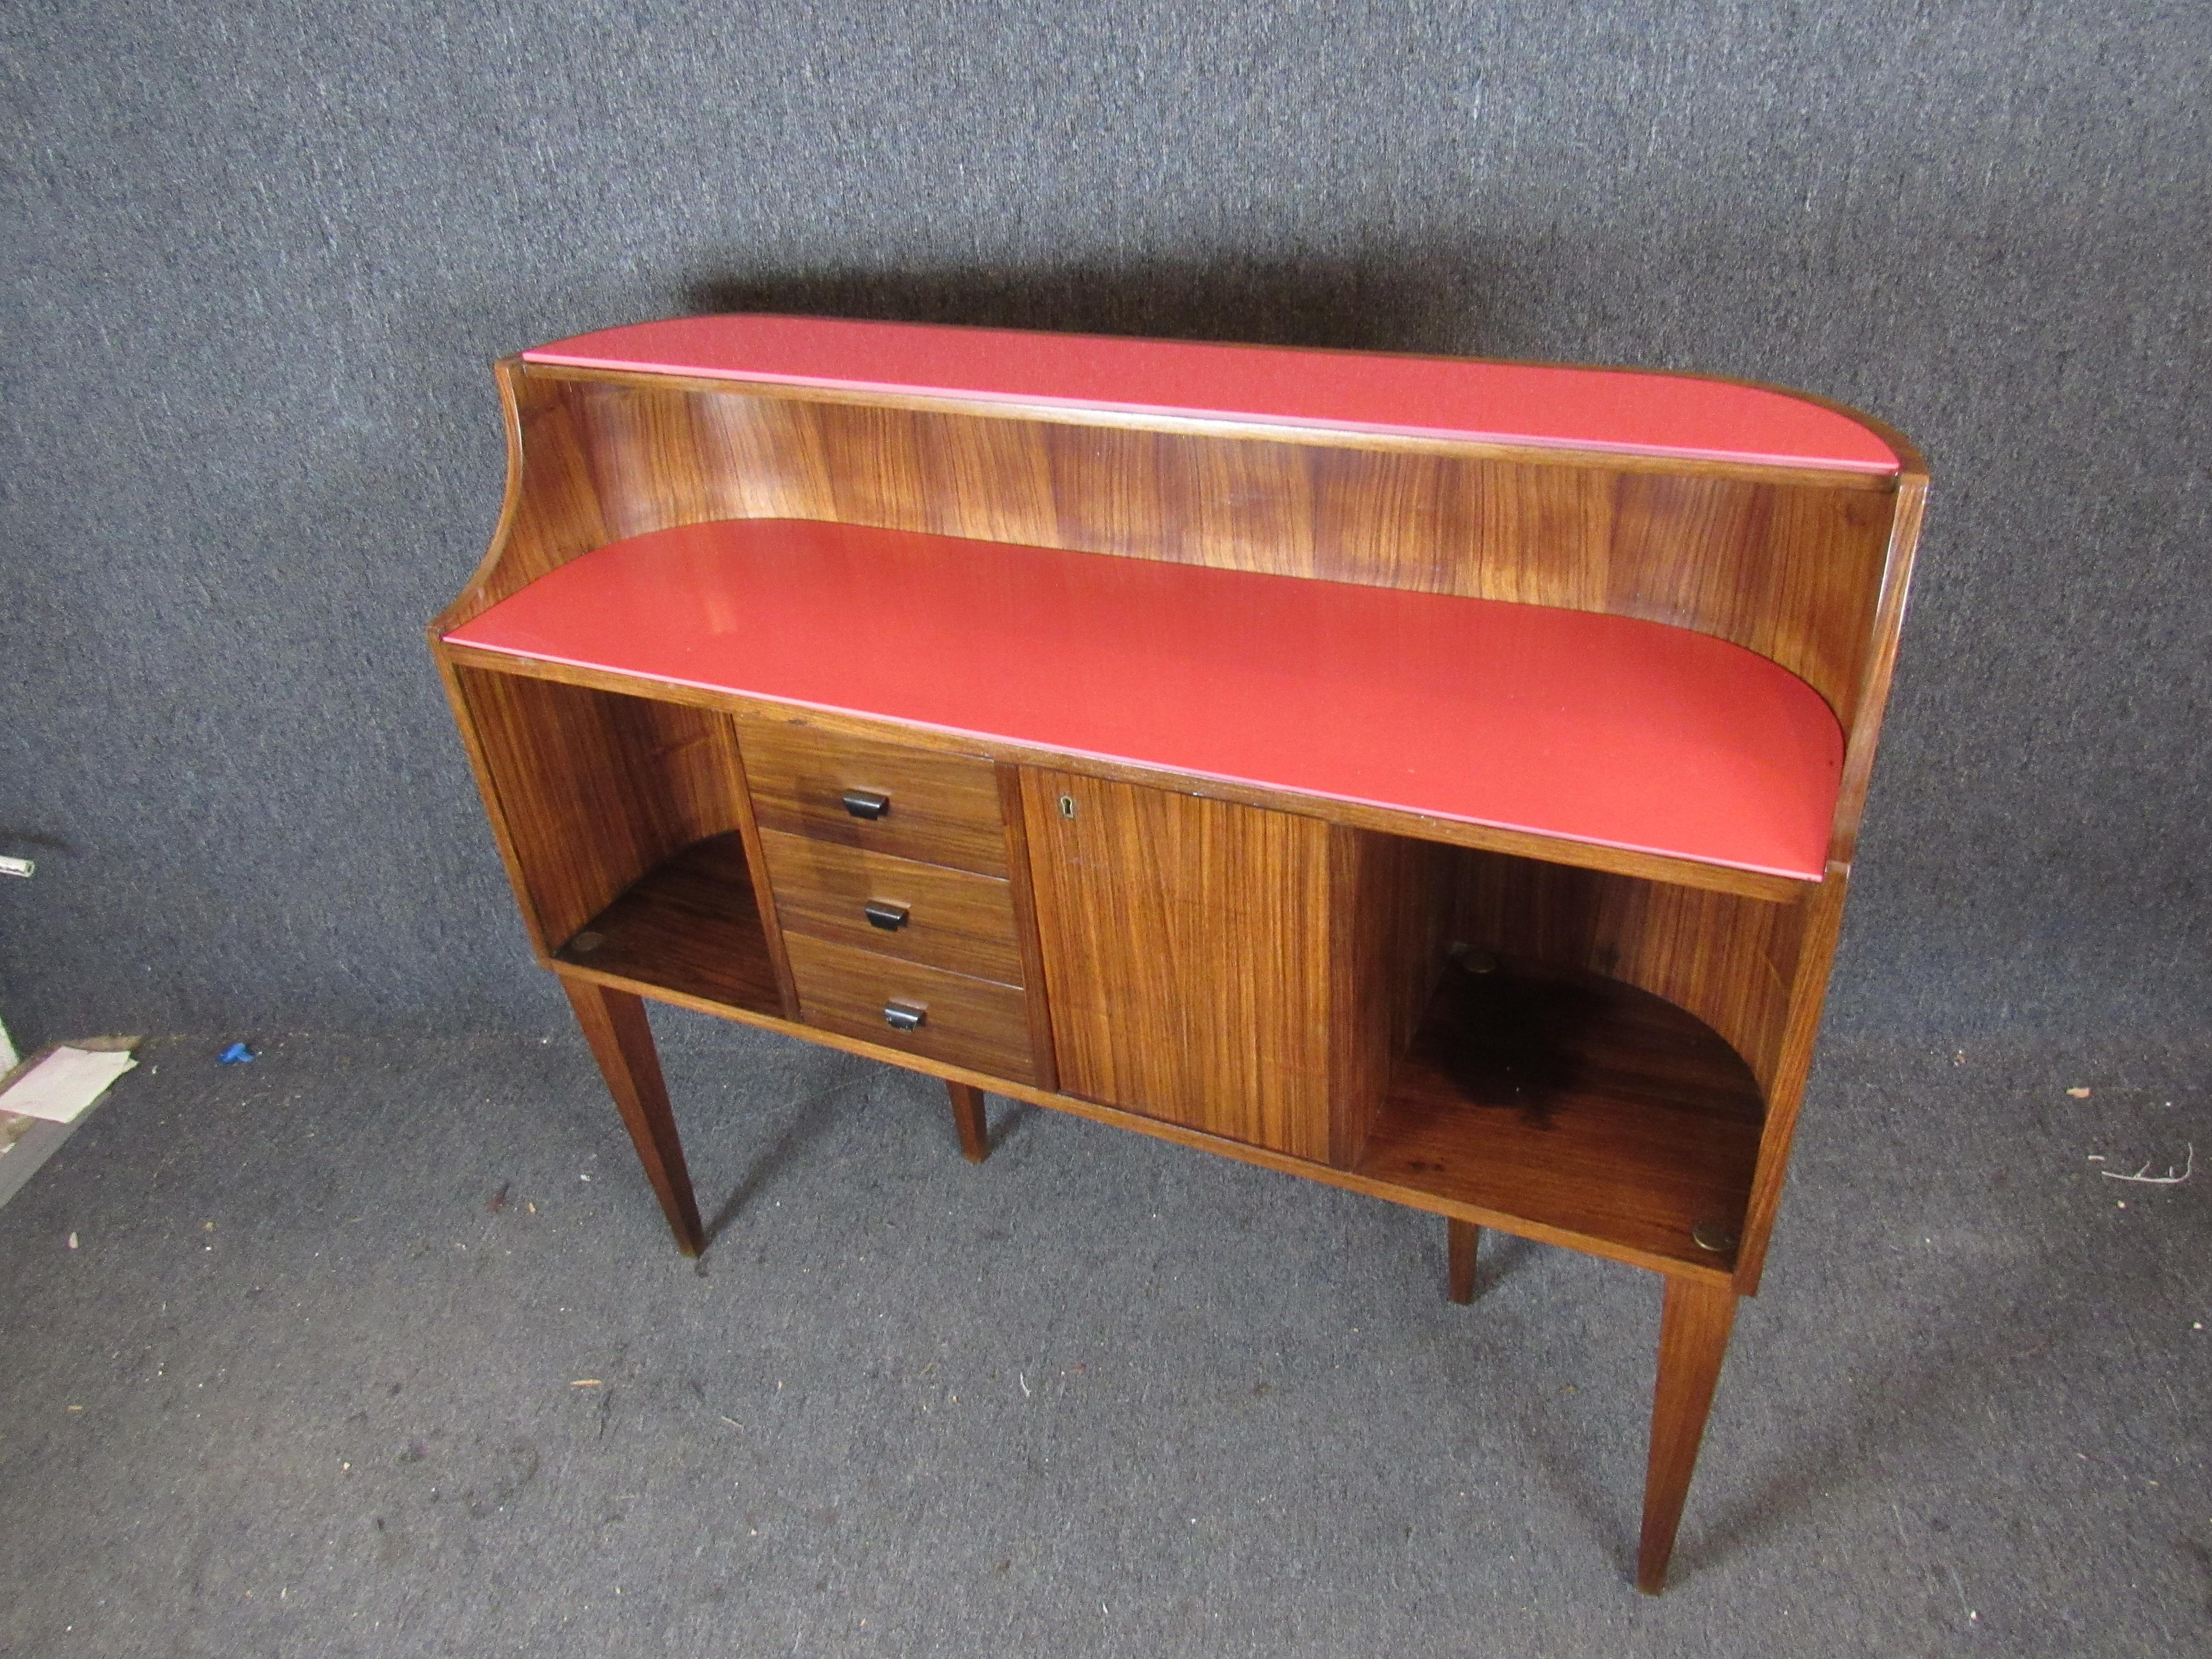 This stunning midcentury vintage Italian console bar shows off a gorgeous walnut wood grain and brings an extra pop of color with funky coral pink glass tops. Two curved open cabinets and three pull-out drawers offer plenty of storage an